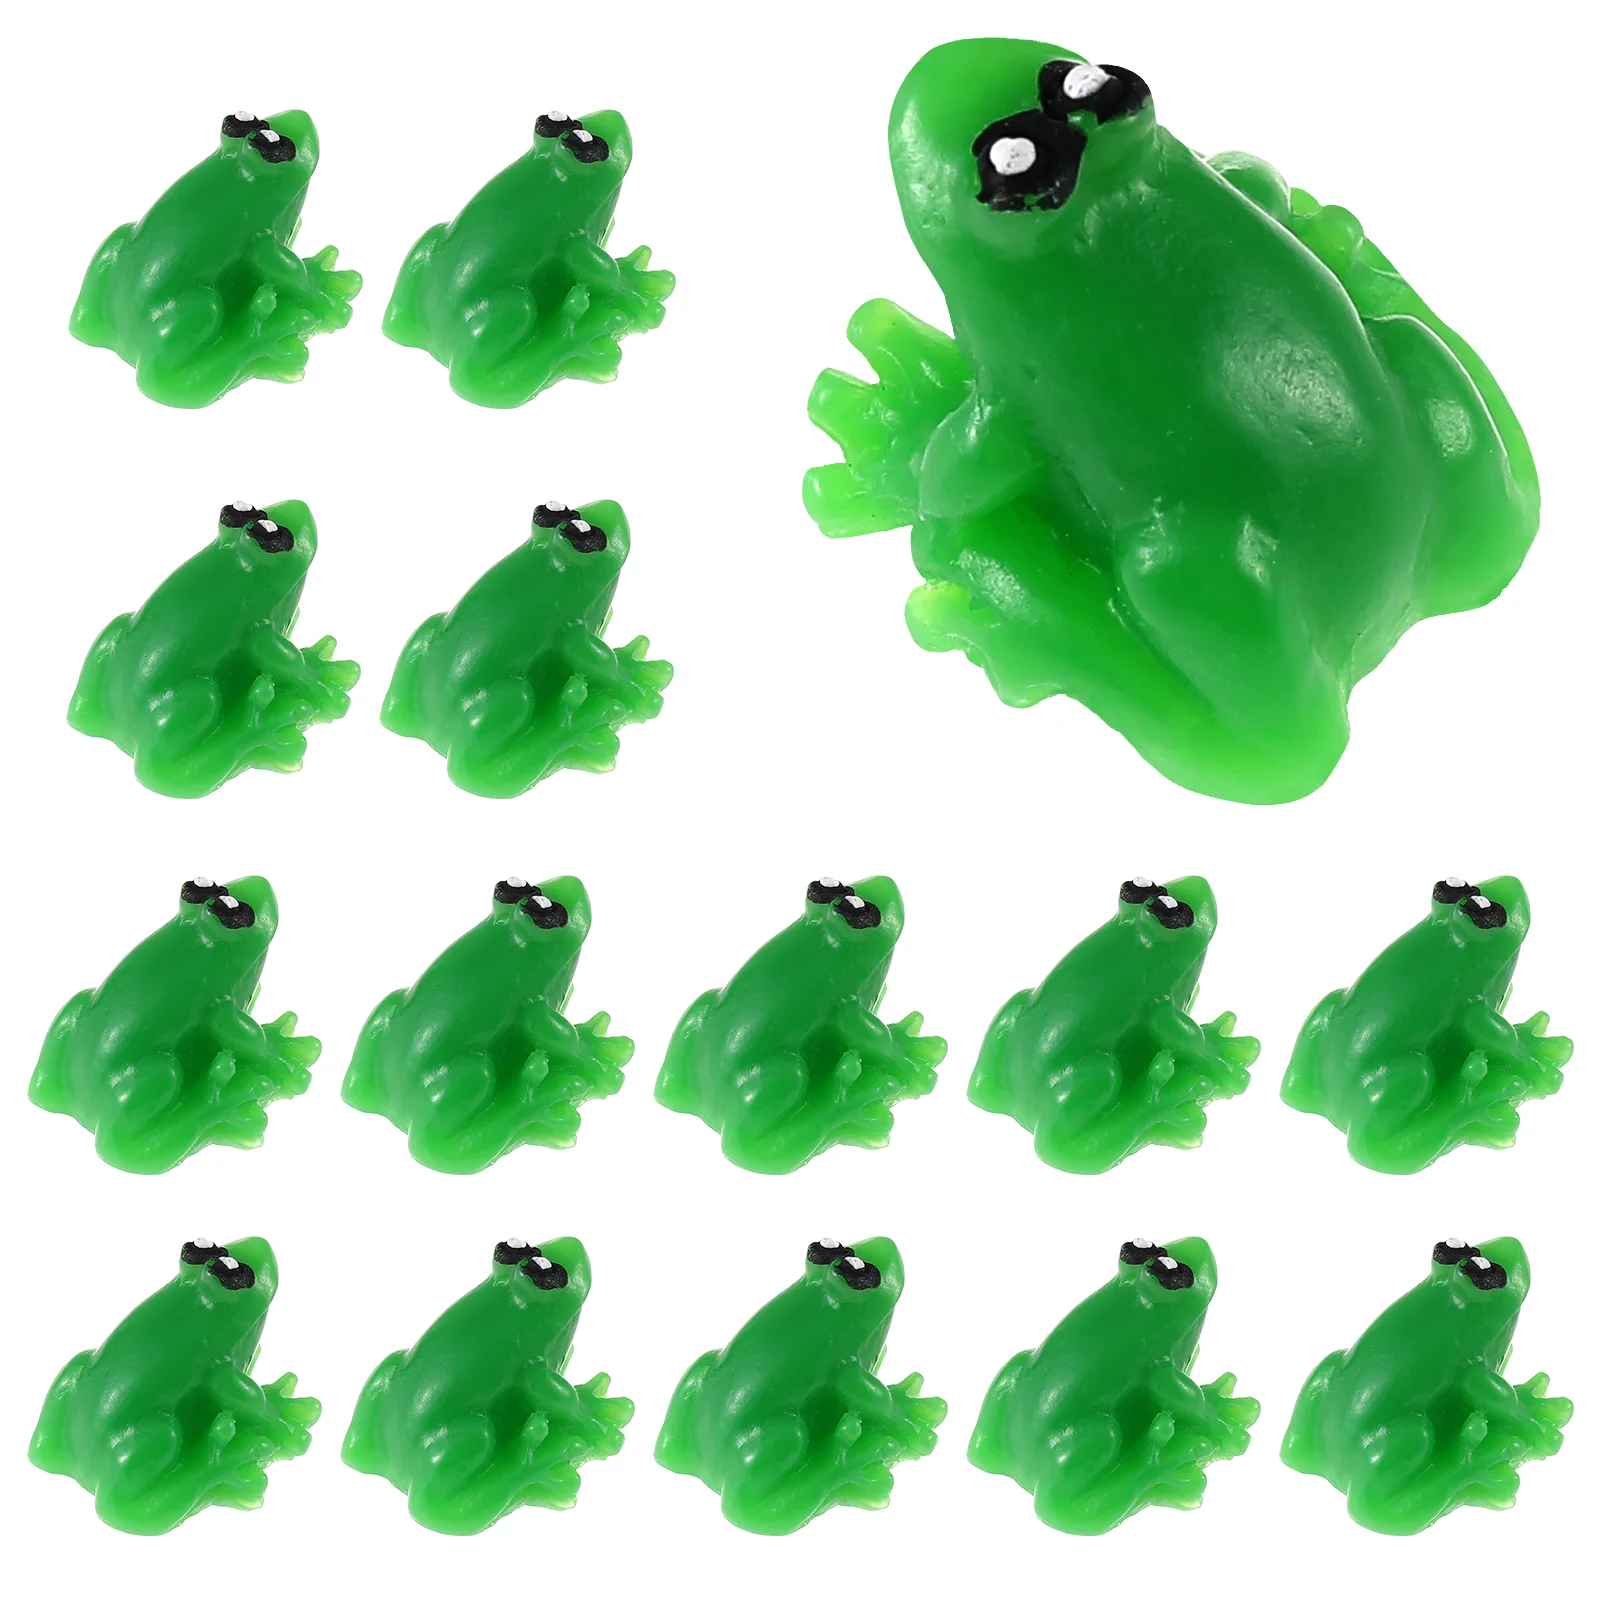 

Frogs Miniature Resin Figurines Statues Ornaments Tiny Mini Animals Frog Landscape Figurine Adornments Animal Crafts